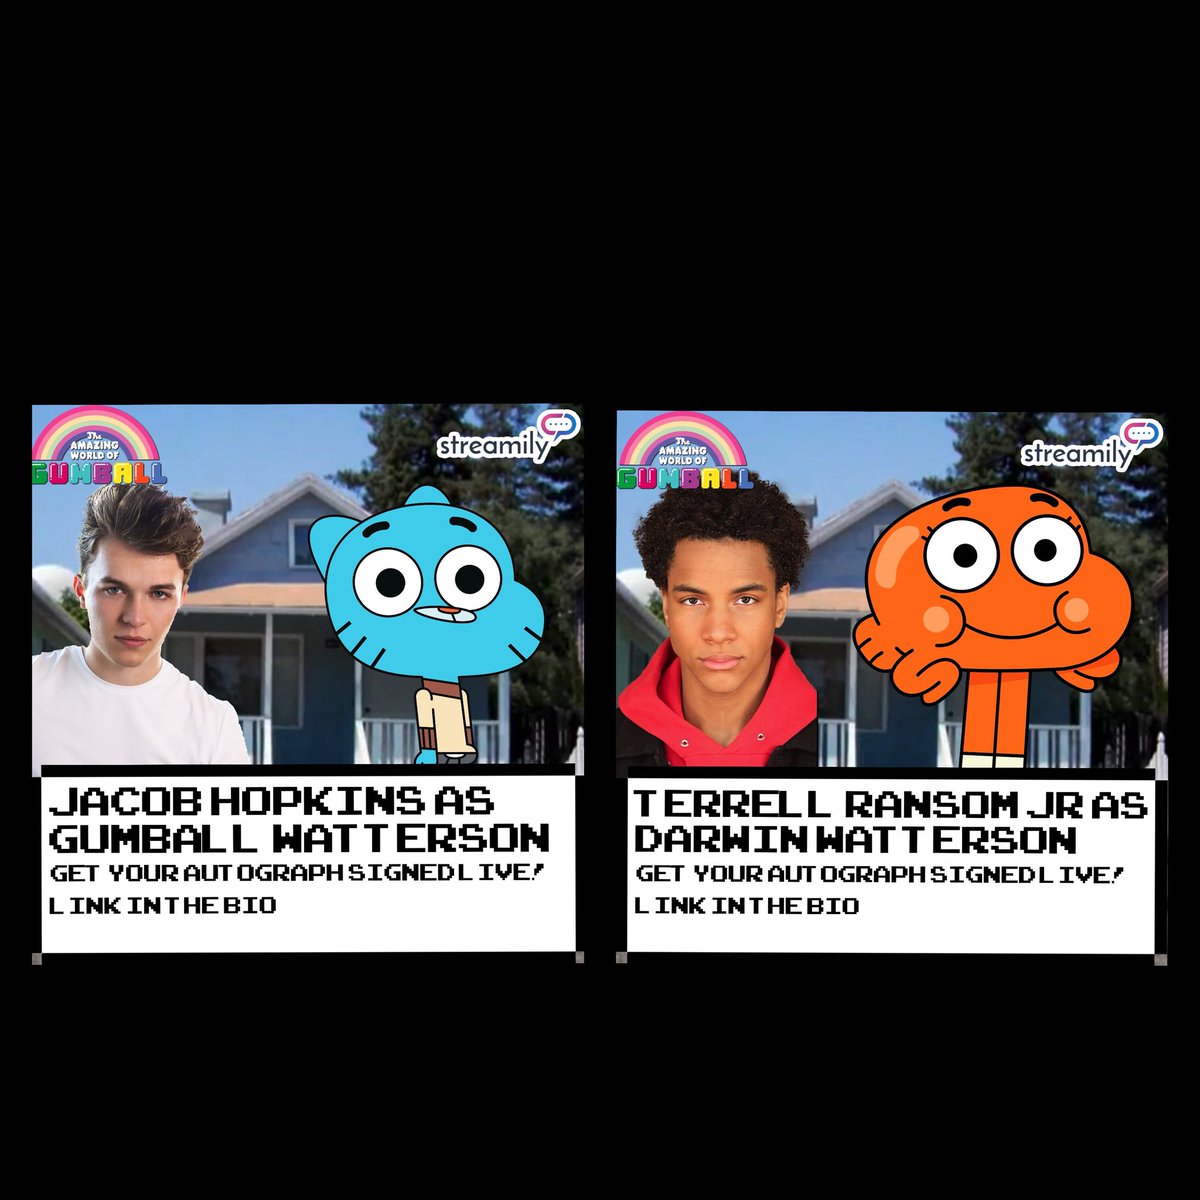 Me & my bro @HopkinsJacob5 are linking up June 19th at 3pm for our live signing event with @StreamilyLive on @instagram! Grab a print & we’ll sign it live! #linkinbio #TAWOG #Gumball #GumballWatterson #DarwinWatterson #TheAmazingWorldofGumball #Streamily